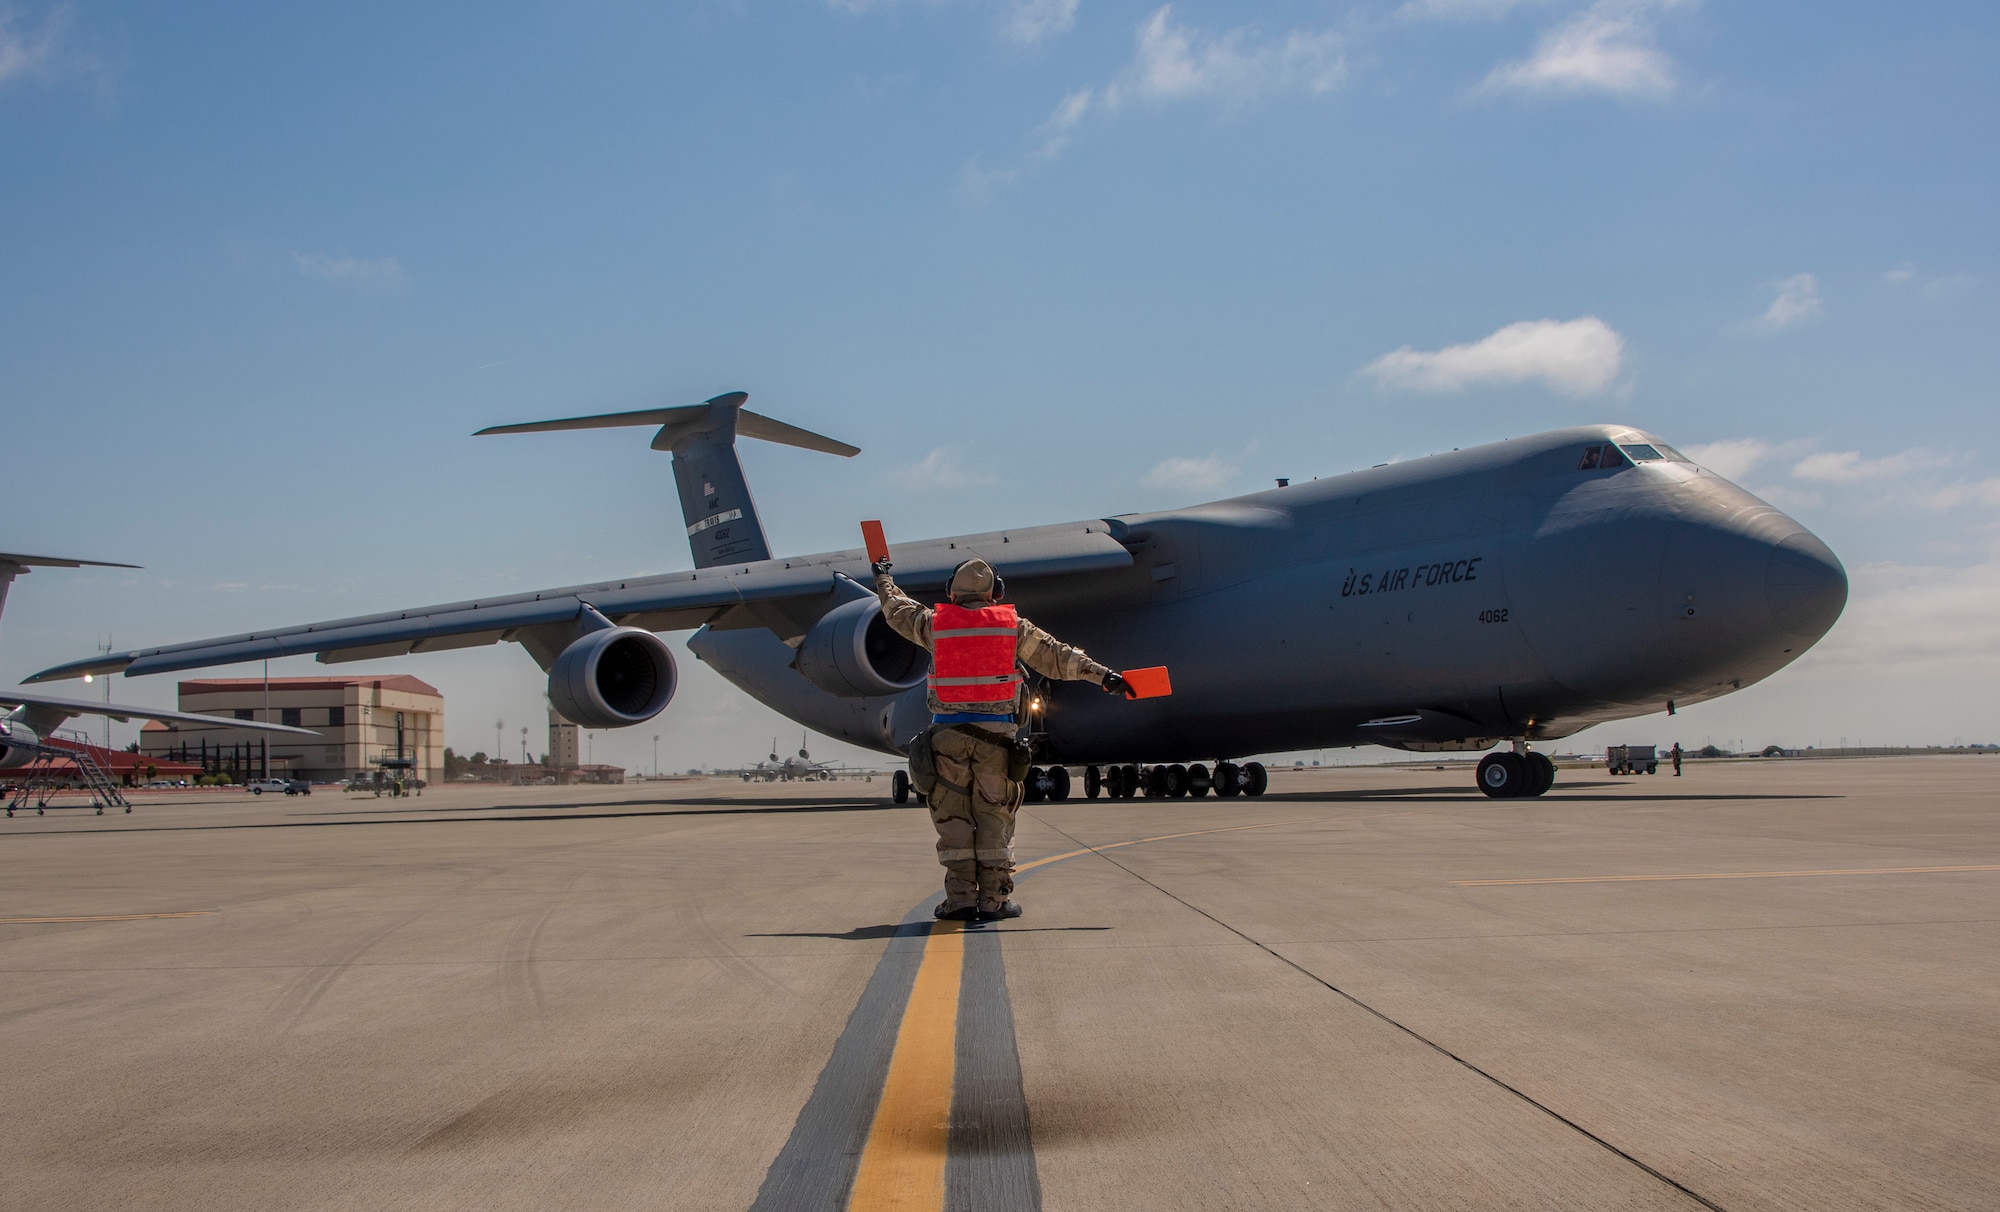 U.S. Air Force Staff Sgt. Corey Fugate, 349th Aircraft Maintenance Squadron marshals a C-5M Super Galaxy during a readiness exercise at Travis Air Force Base, California, May 9, 2019. The base conducted a week-long exercise that evaluated Travis’ readiness and ability to execute and sustain rapid global mobility around the world. (U.S. Air Force photo by Heide Couch)